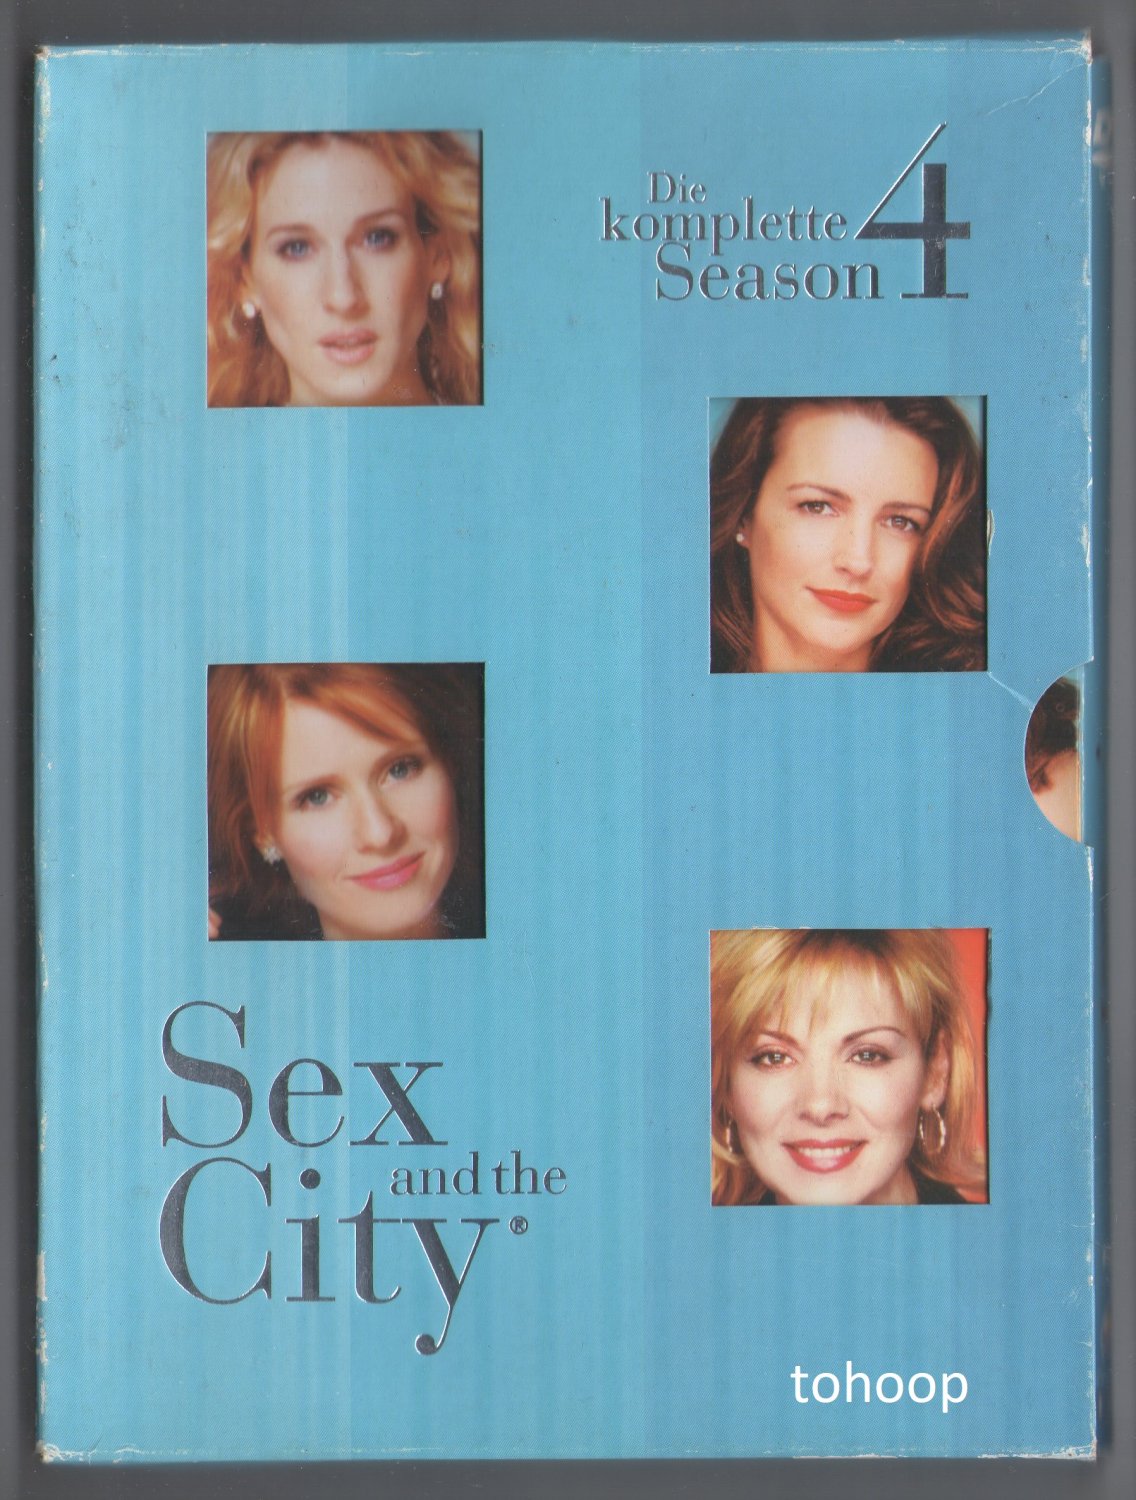 staffel sex and the city